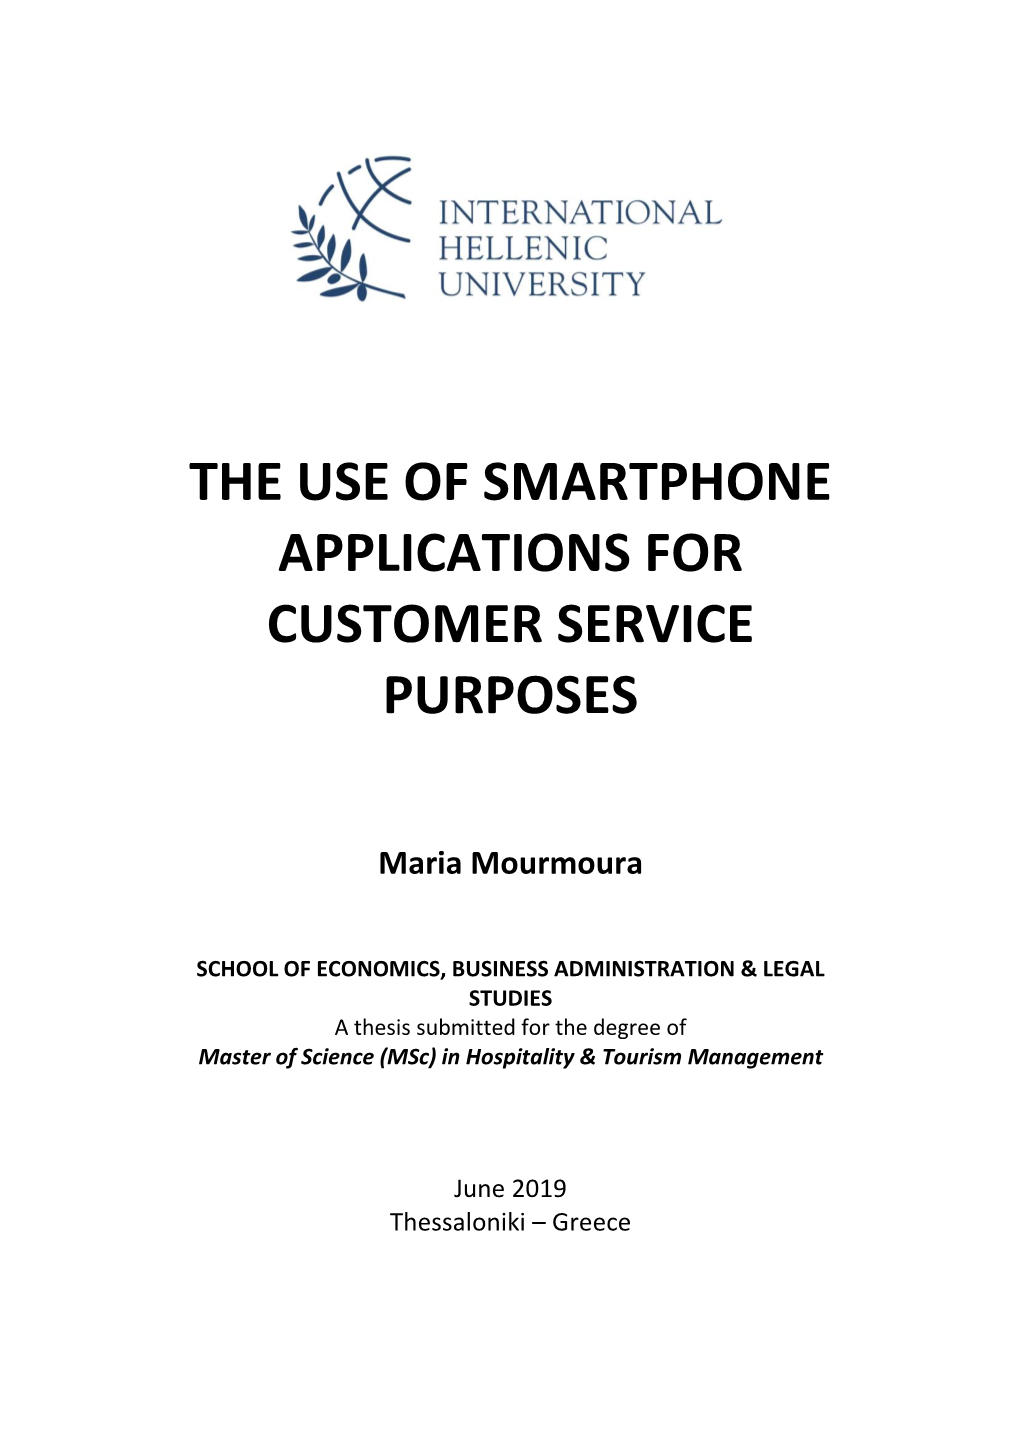 The Use of Smartphone Applications for Customer Service Purposes